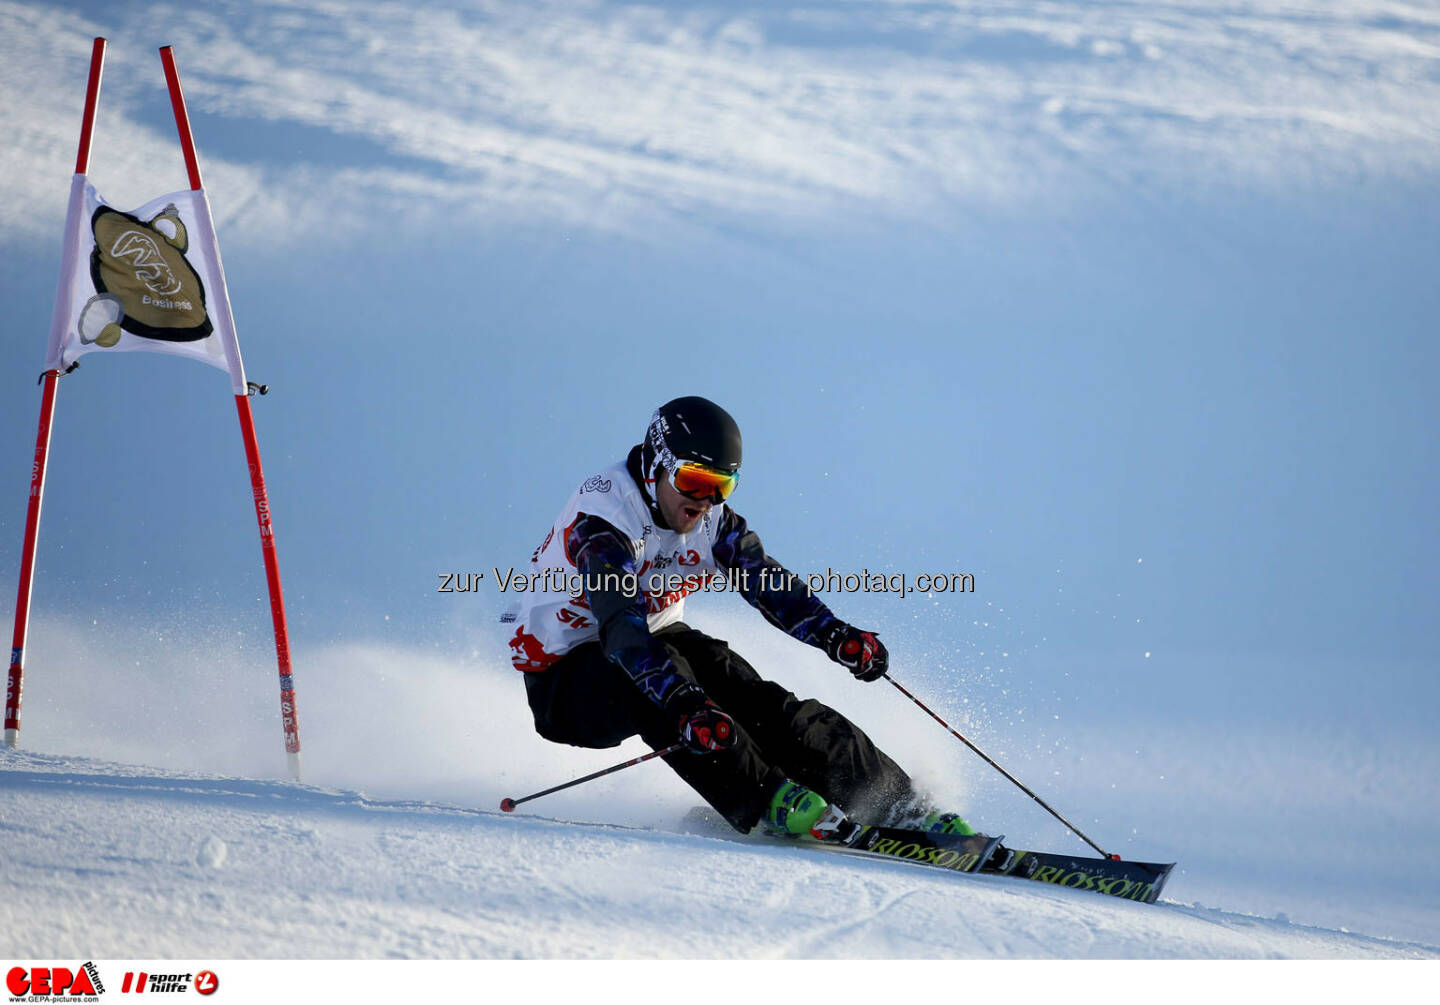 Ski for Gold Charity Race. Image shows Reinfried Herbst. Photo: GEPA pictures/ Daniel Goetzhaber